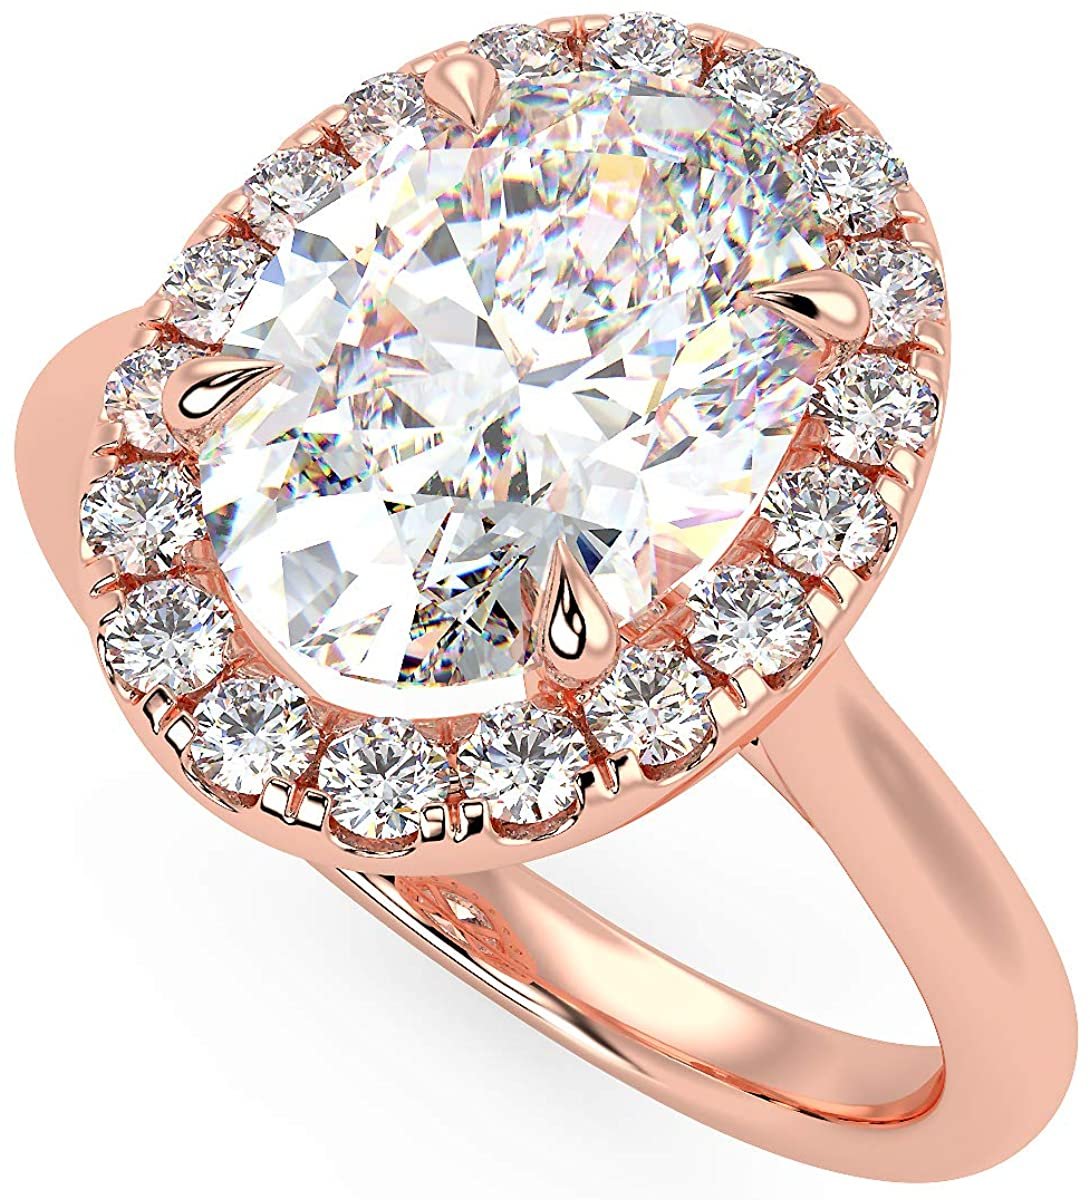 IGI Certified 14K Rose Gold 2-1/3 Carat Oval Lab Created Diamond Vintage-Inspired Halo Engagement Ring (2.0 Carat Center Stone: G-H Color, VS1-VS2 Clarity) - Size 7-3/4